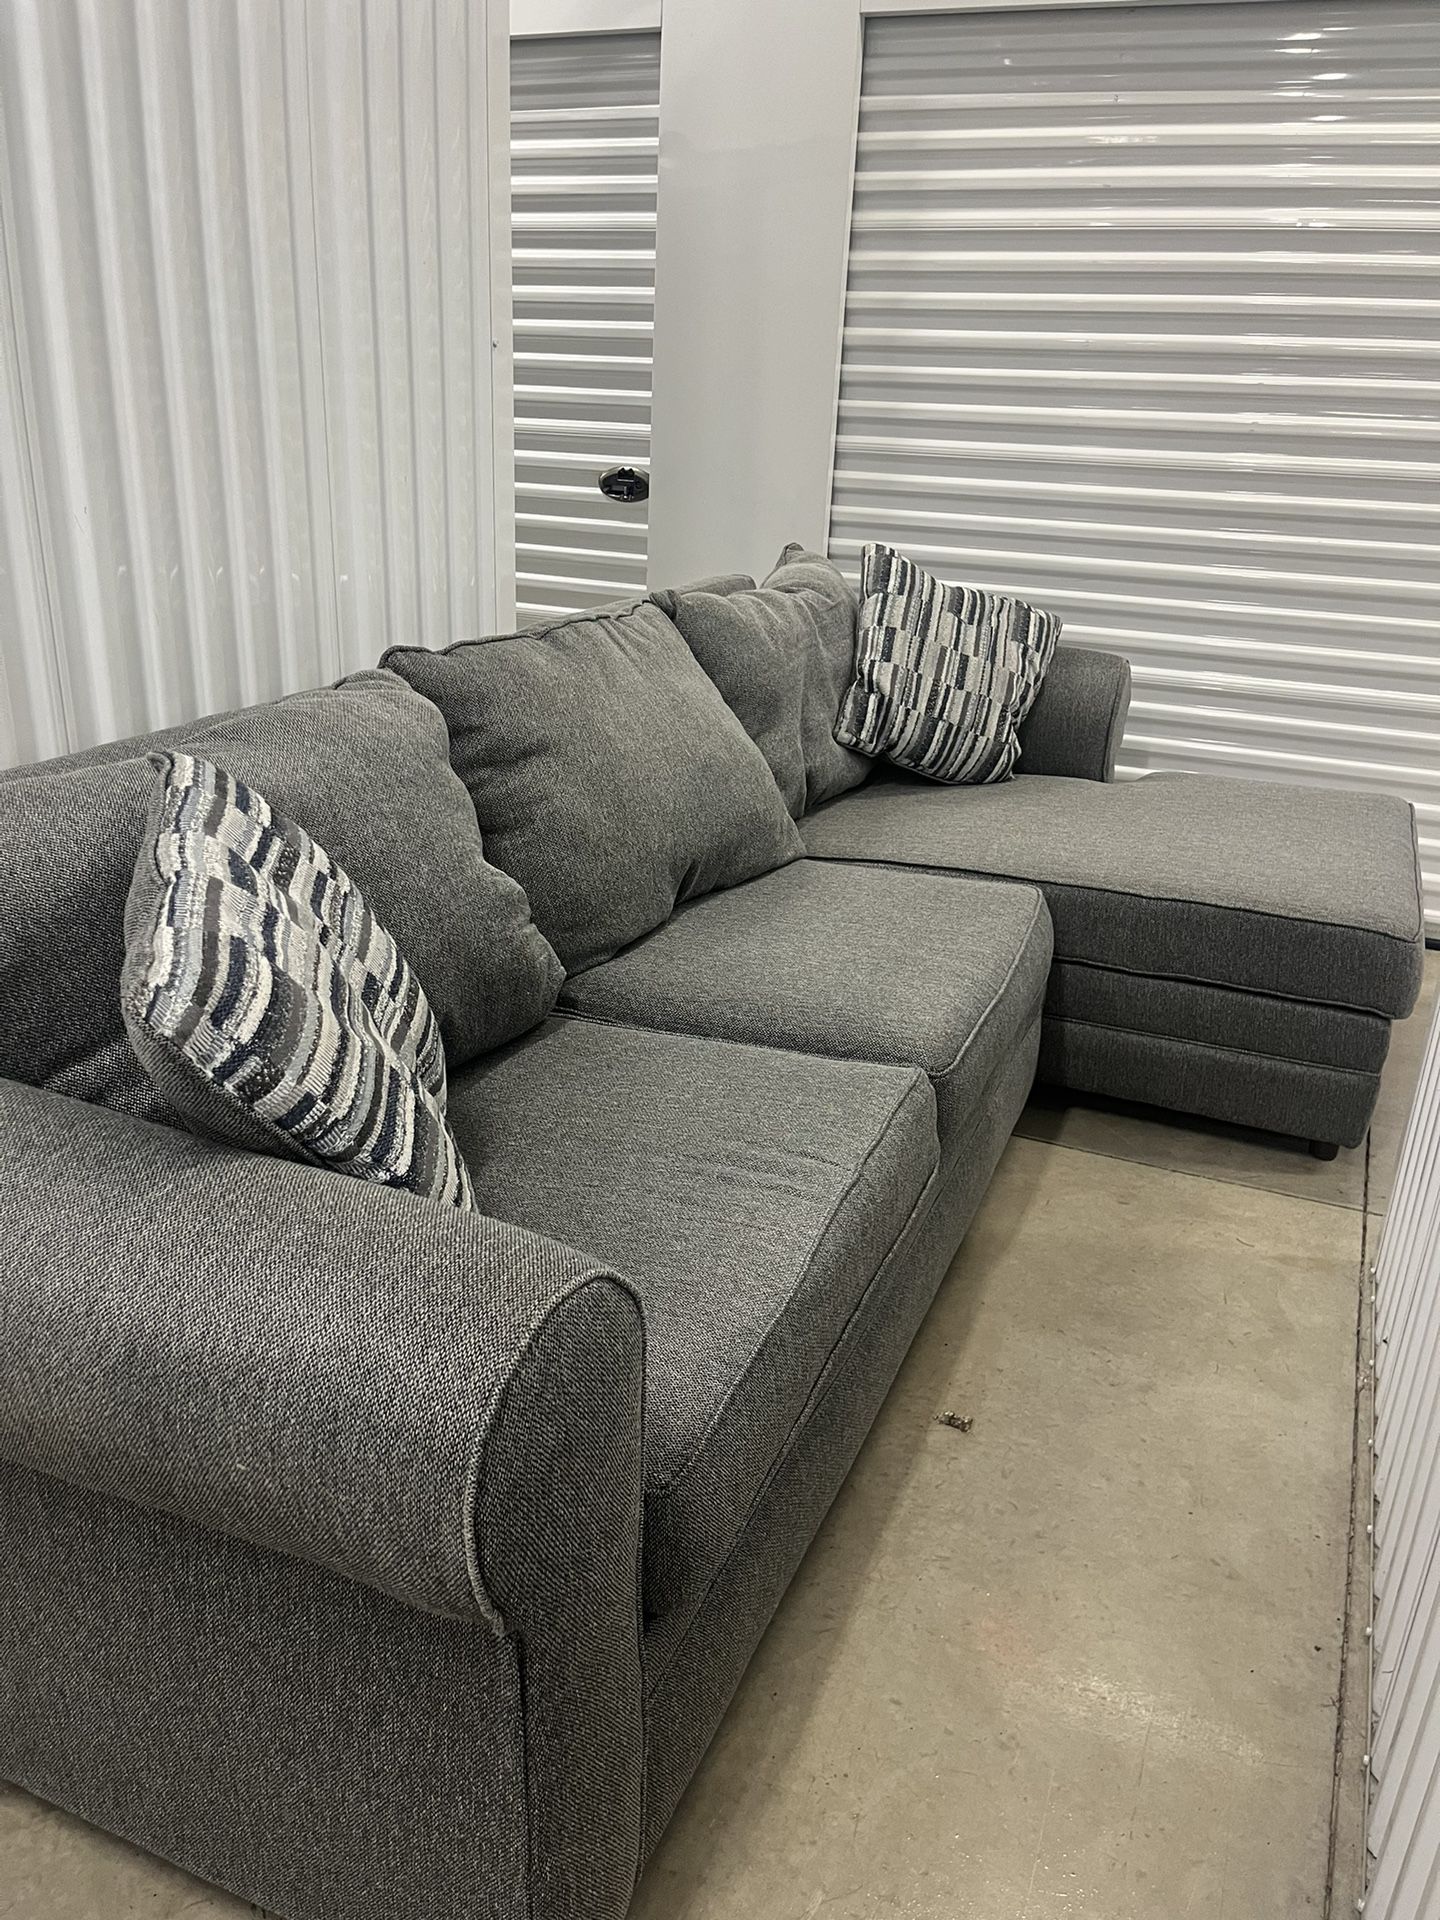 Two Piece Sectional Couch